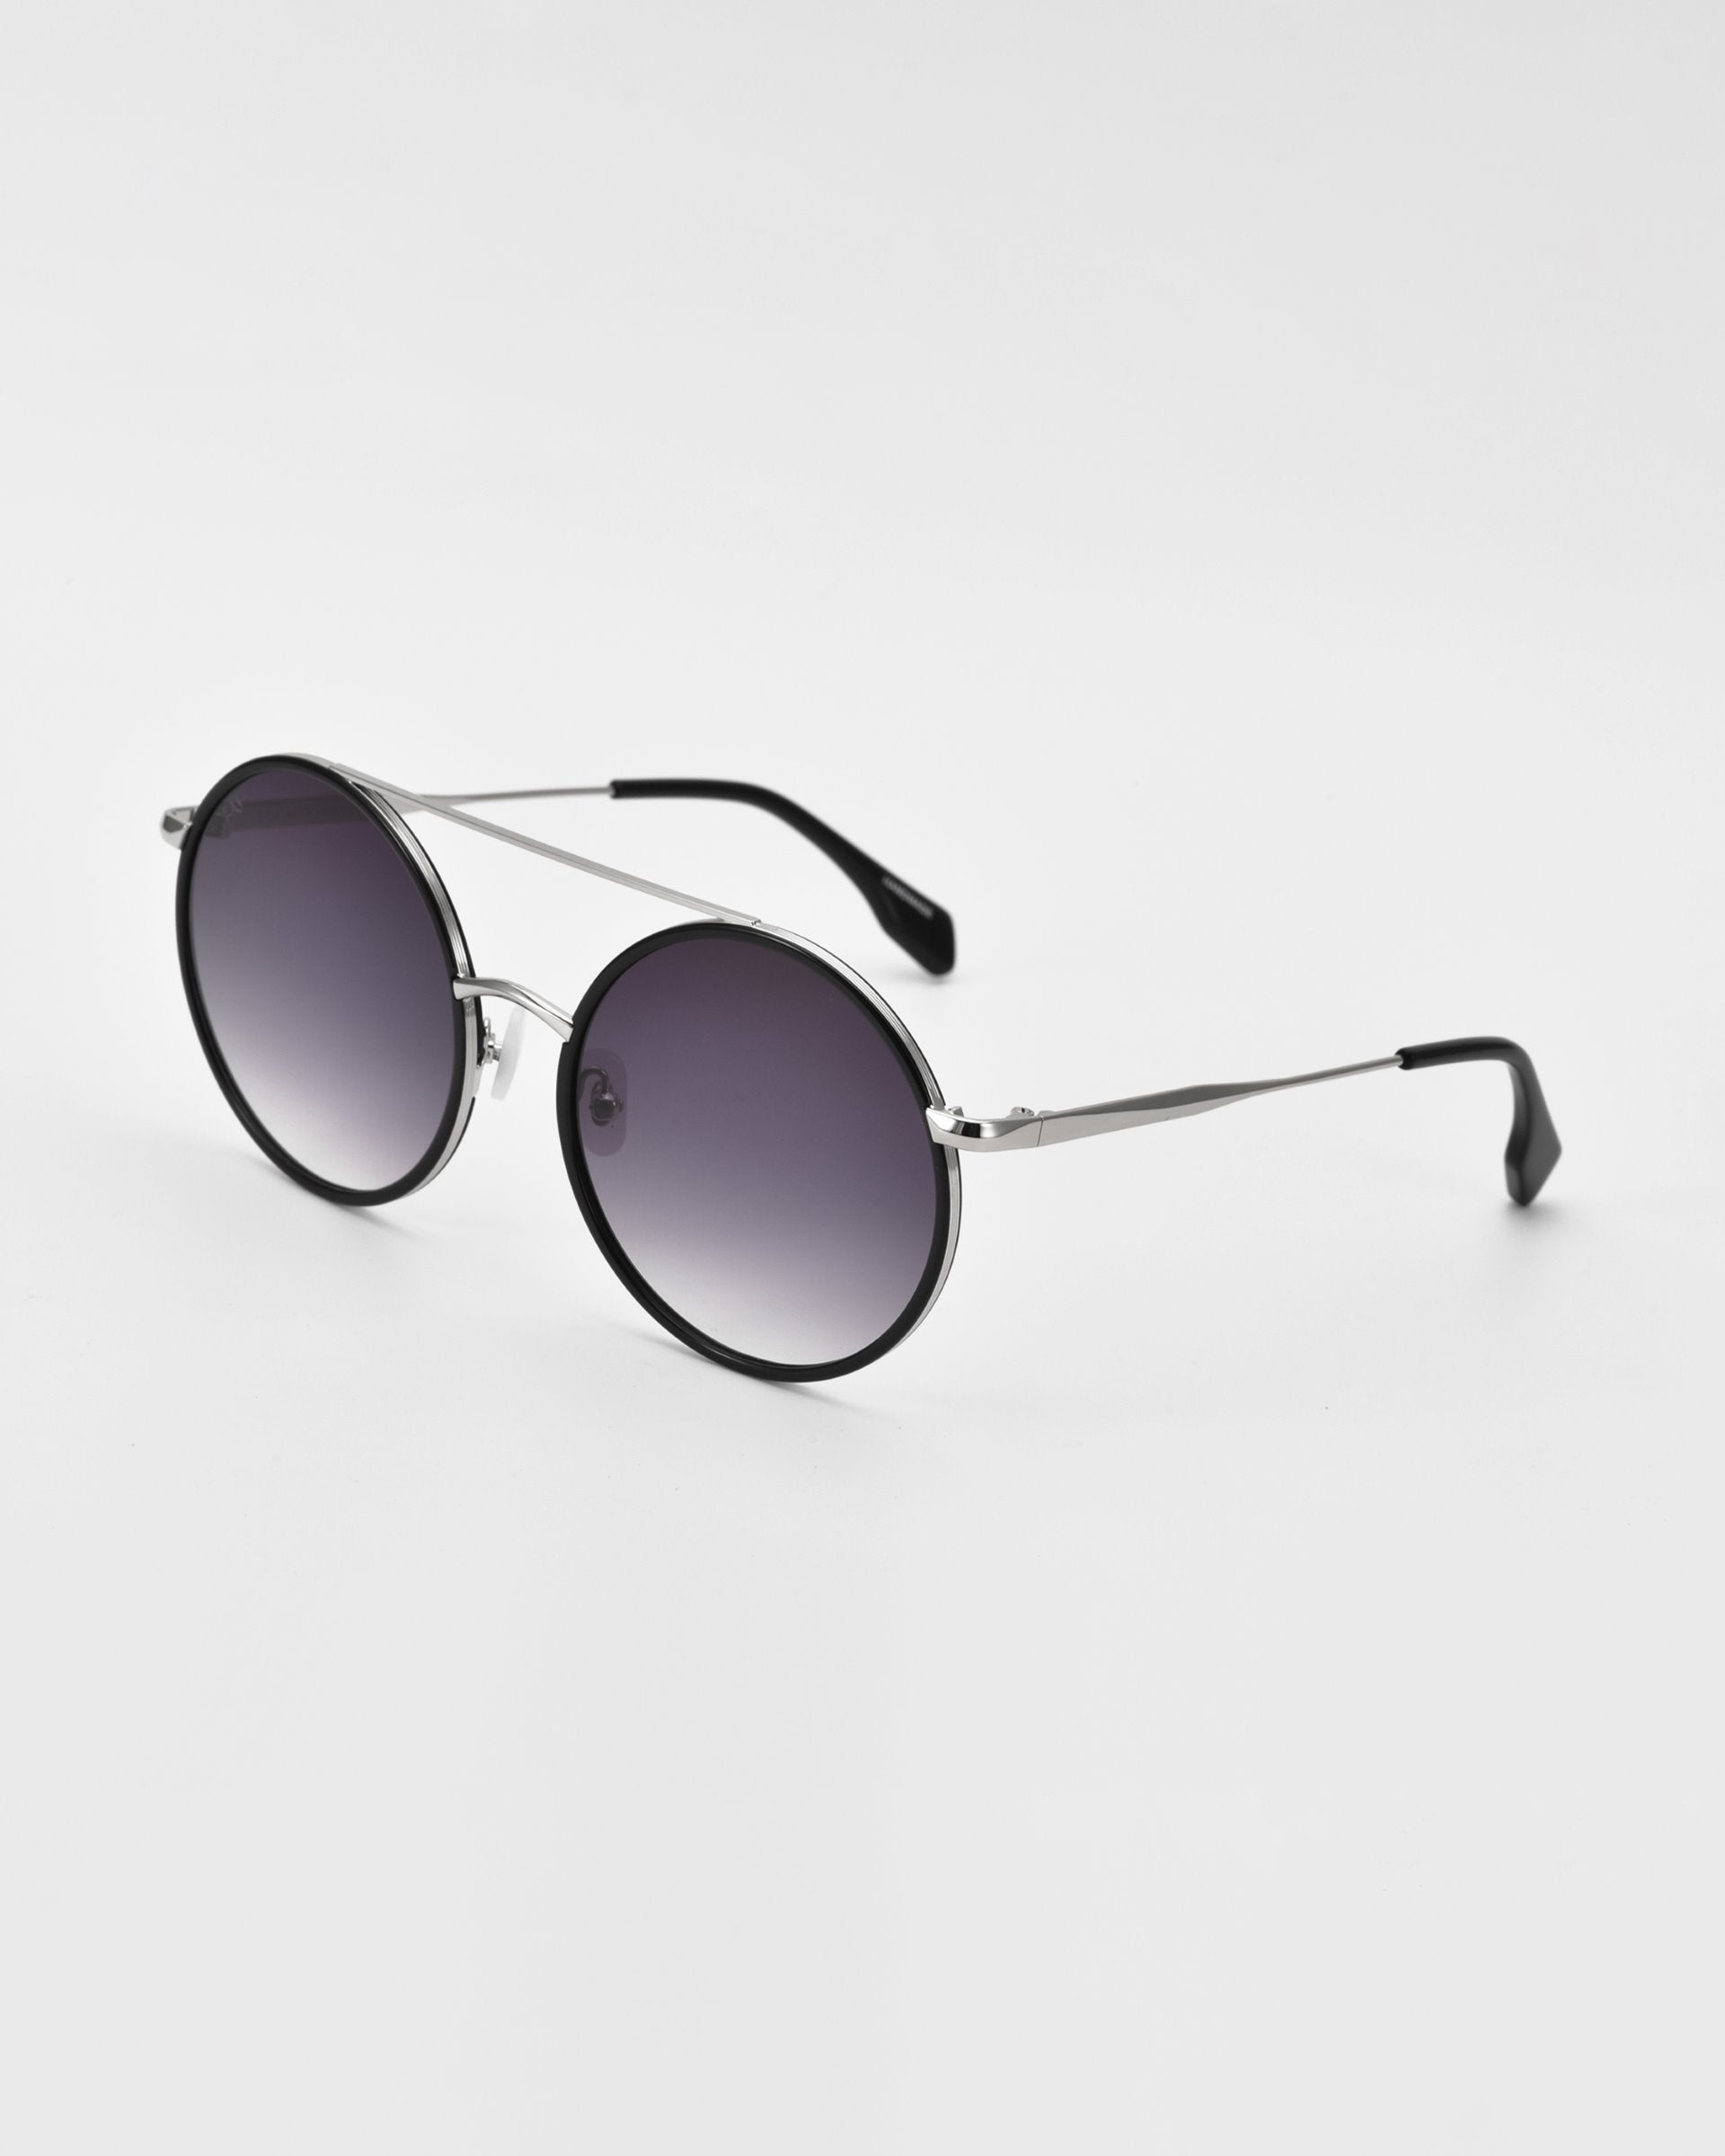 A pair of oversized round aviator sunglasses with black-rimmed, dark gradient lenses and thin, silver arms that have black ear tips. Crafted from gold and silver-tone metal, these stylish shades also feature unique jade-stone nose pads. The For Art's Sake® Orb sunglasses are placed on a flat, white surface, angled slightly to the right.